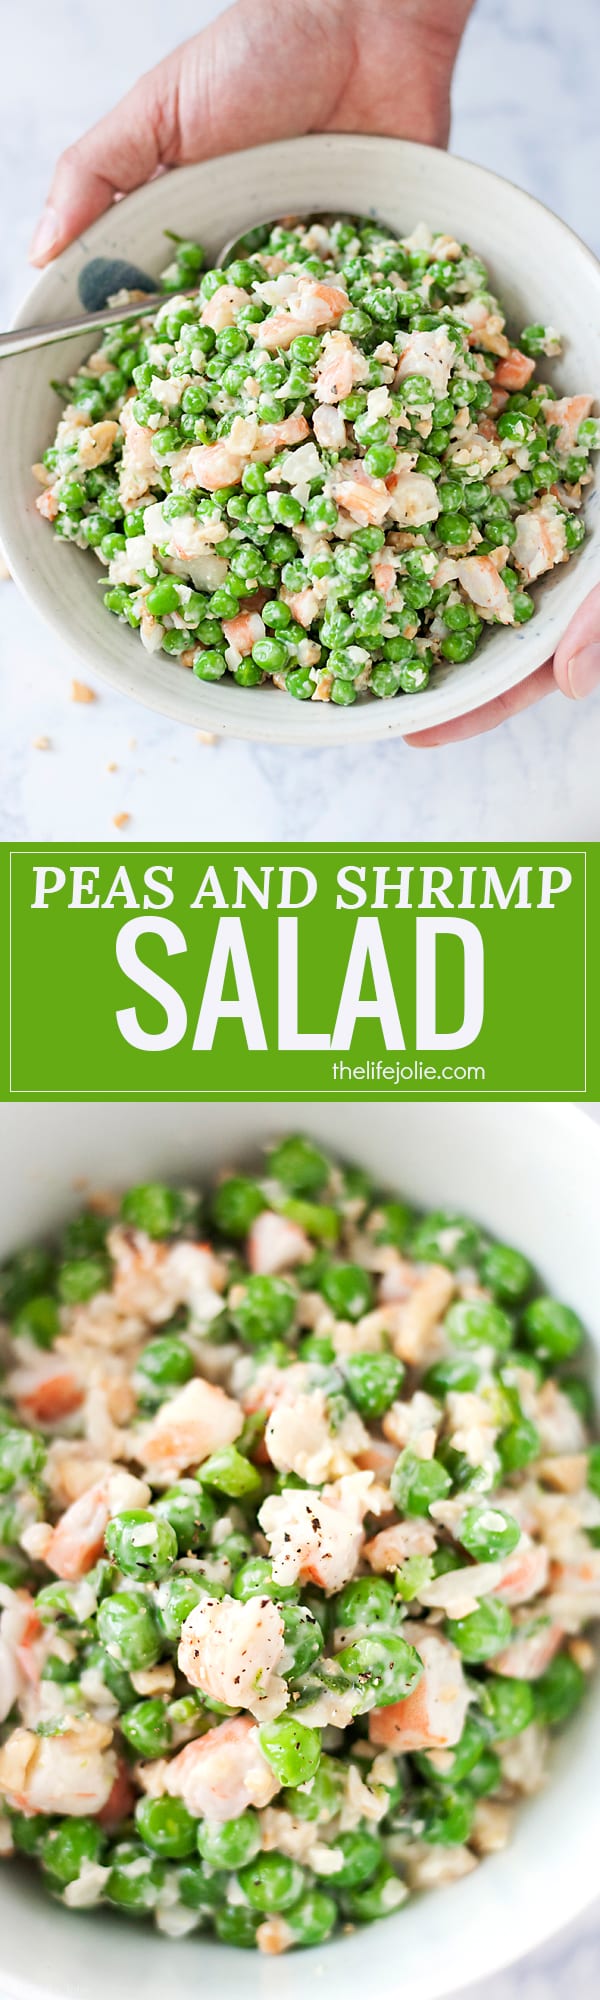 This Peas and Shrimp Salad recipe is a super easy side dish that's perfect for any holiday get together! It's served cold because it's creamy with sweet green peas (I totally used frozen!), shrimp, and cashews and water chestnuts which make it crunchy. Make this if you need a tasty and light Thanksgiving side dish!